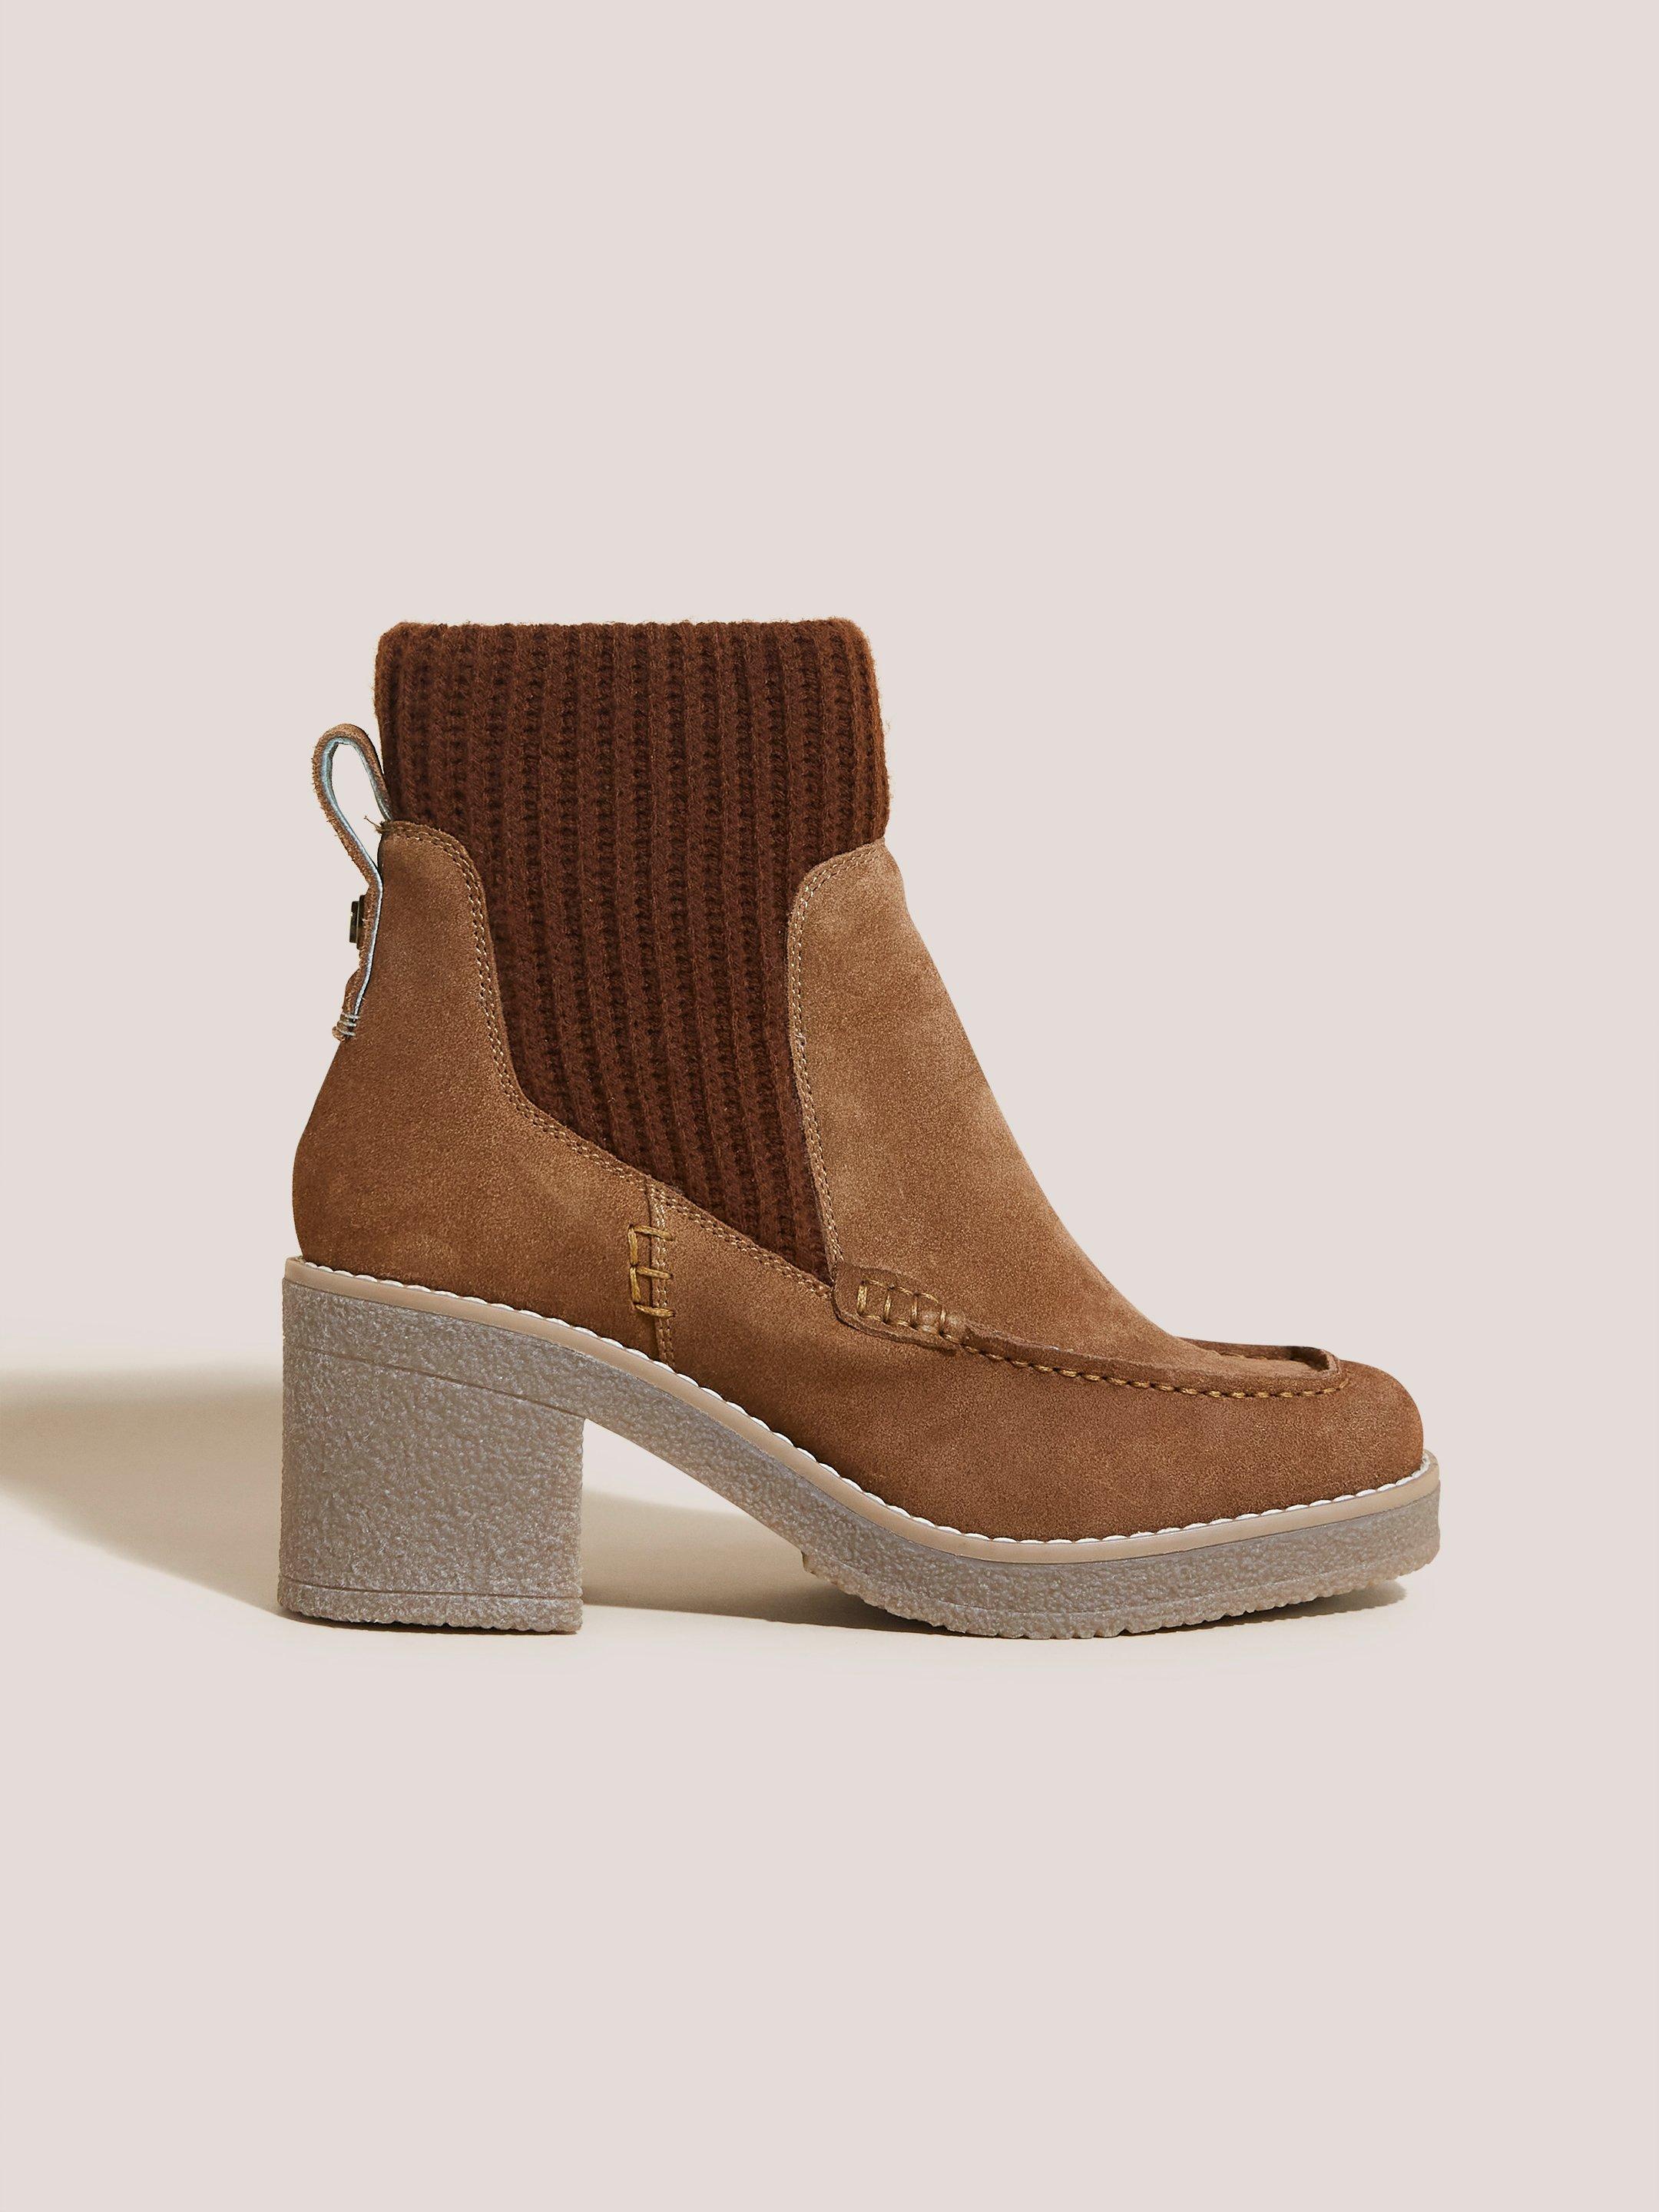 Knitted Suede Heeled Boot in TAN MULTI - MODEL FRONT